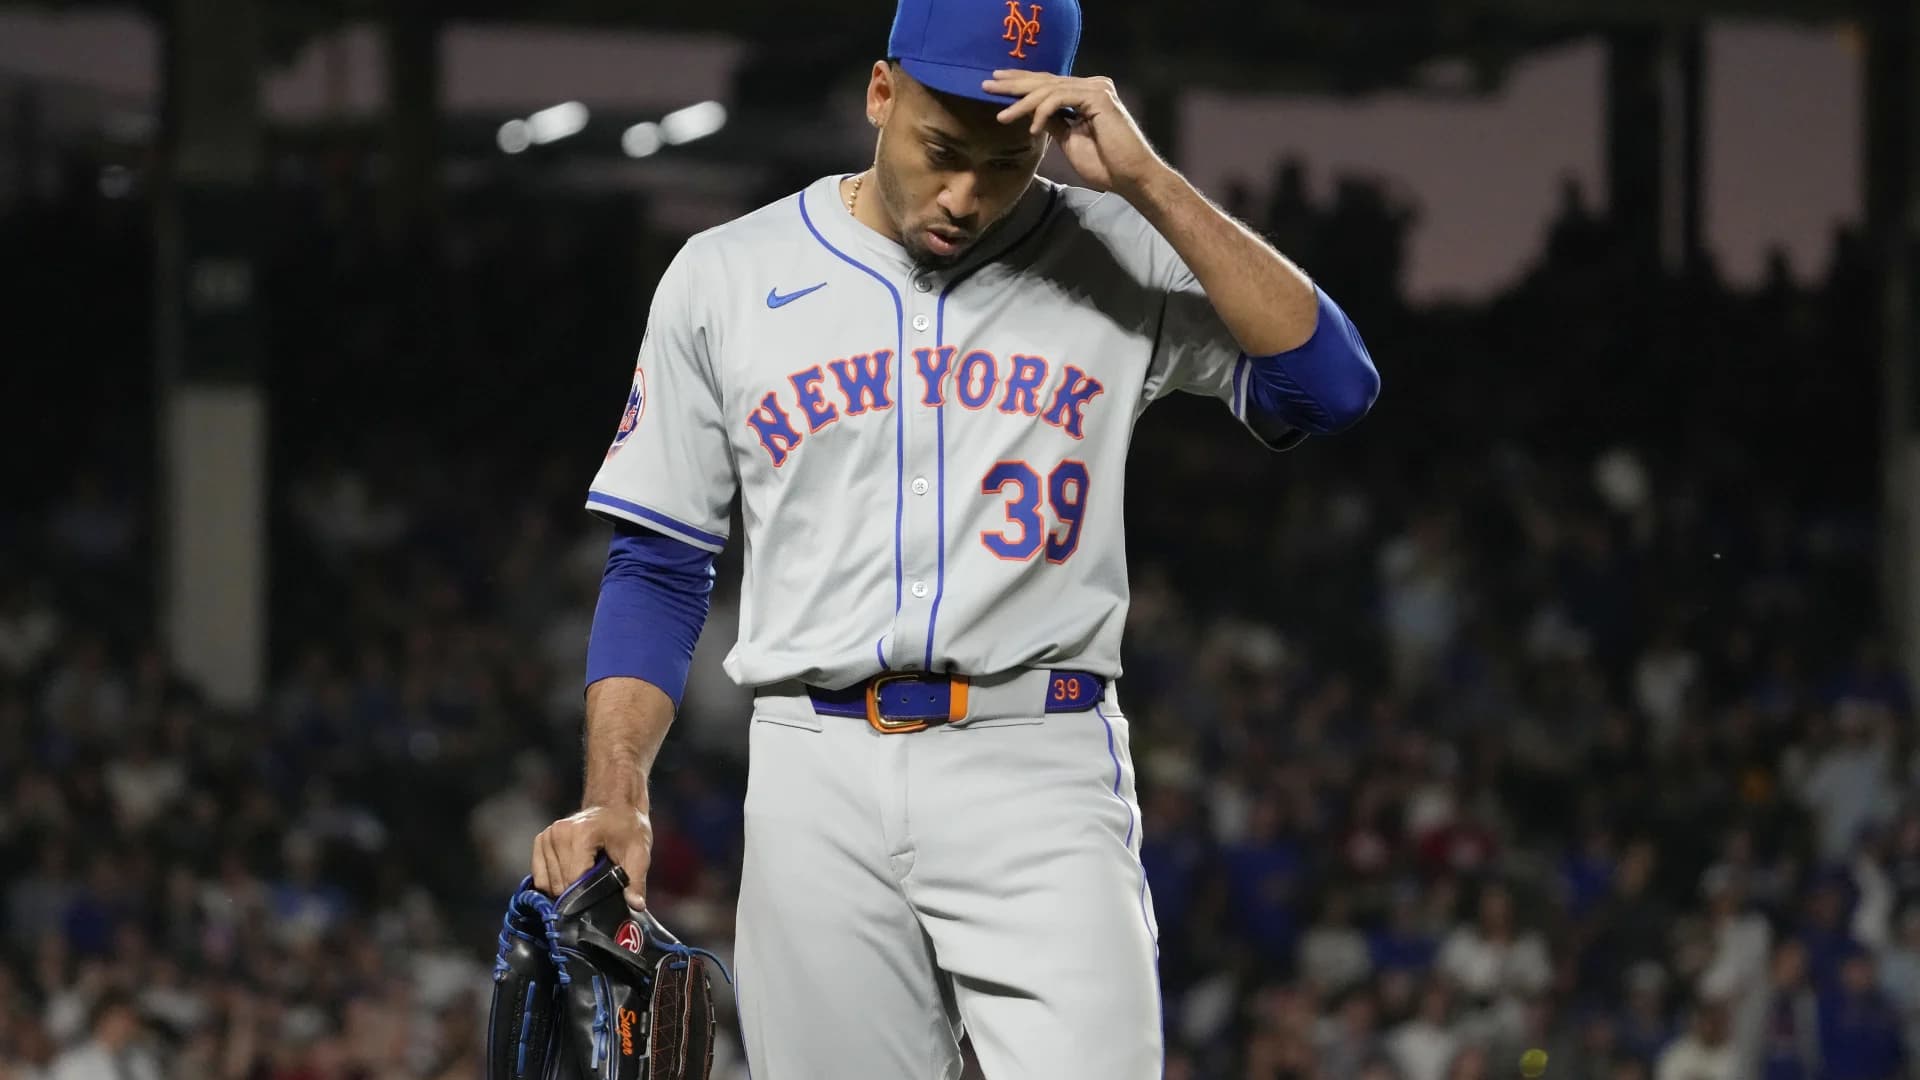 Mets closer Edwin Díaz suspended 10 games after being ejected vs Cubs for foreign substance on hand